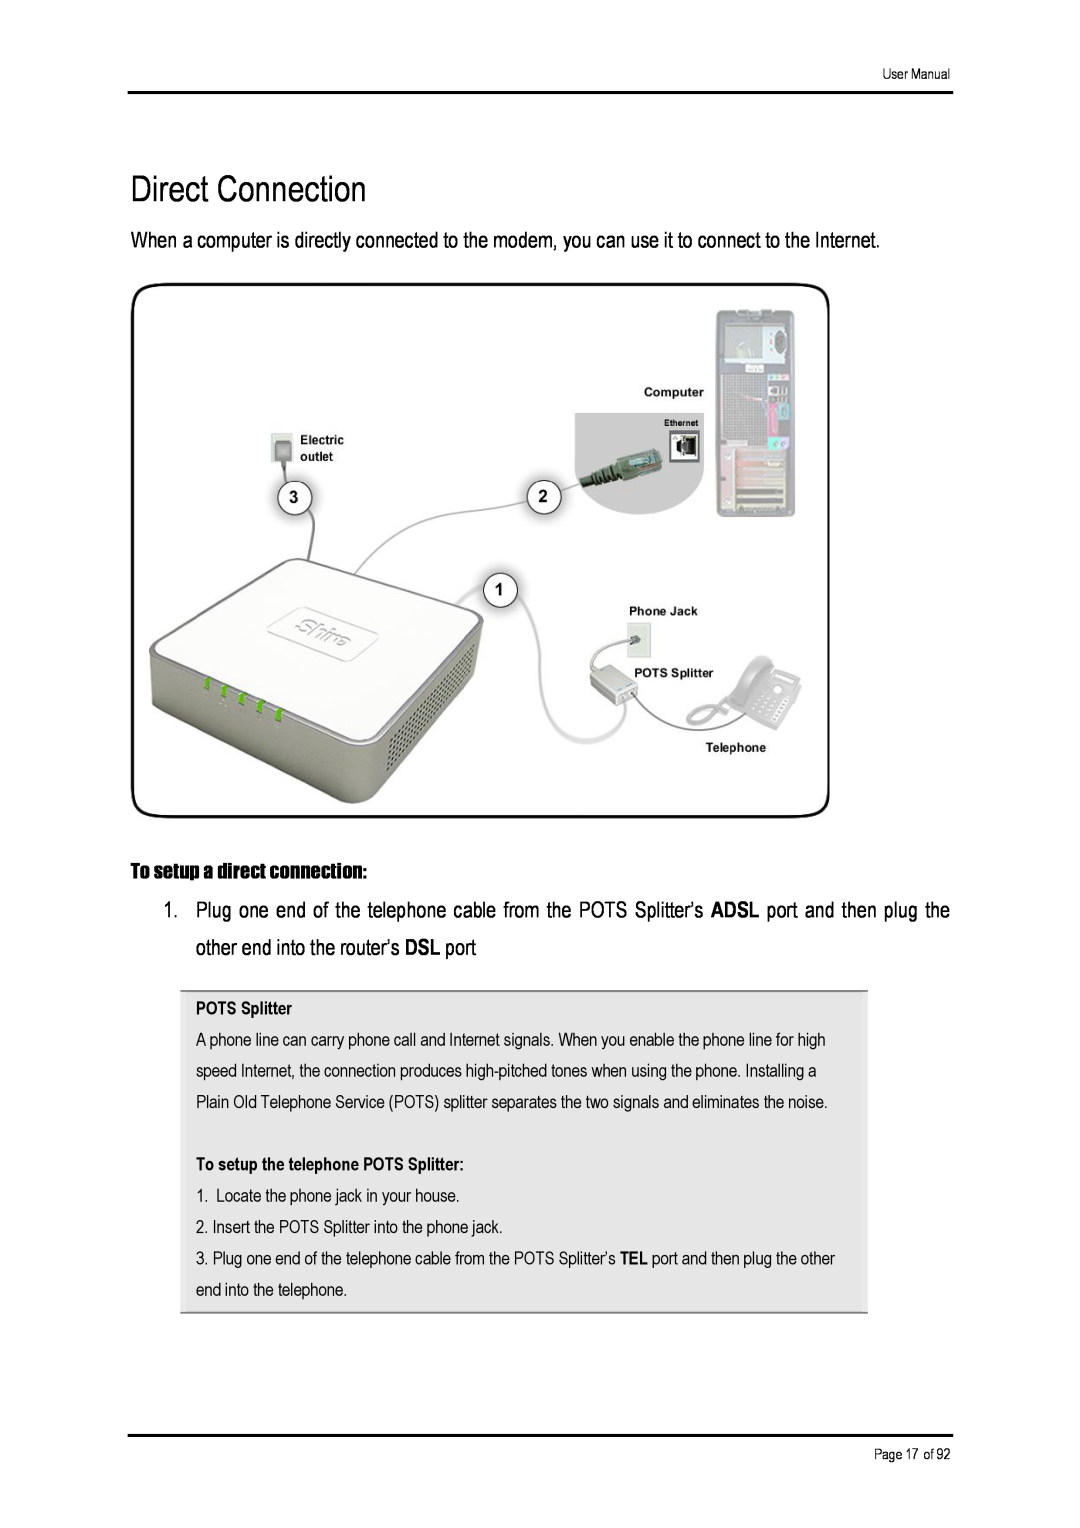 Shiro ADSL 2/2+ Ethernet Modem manual Direct Connection, To setup a direct connection 